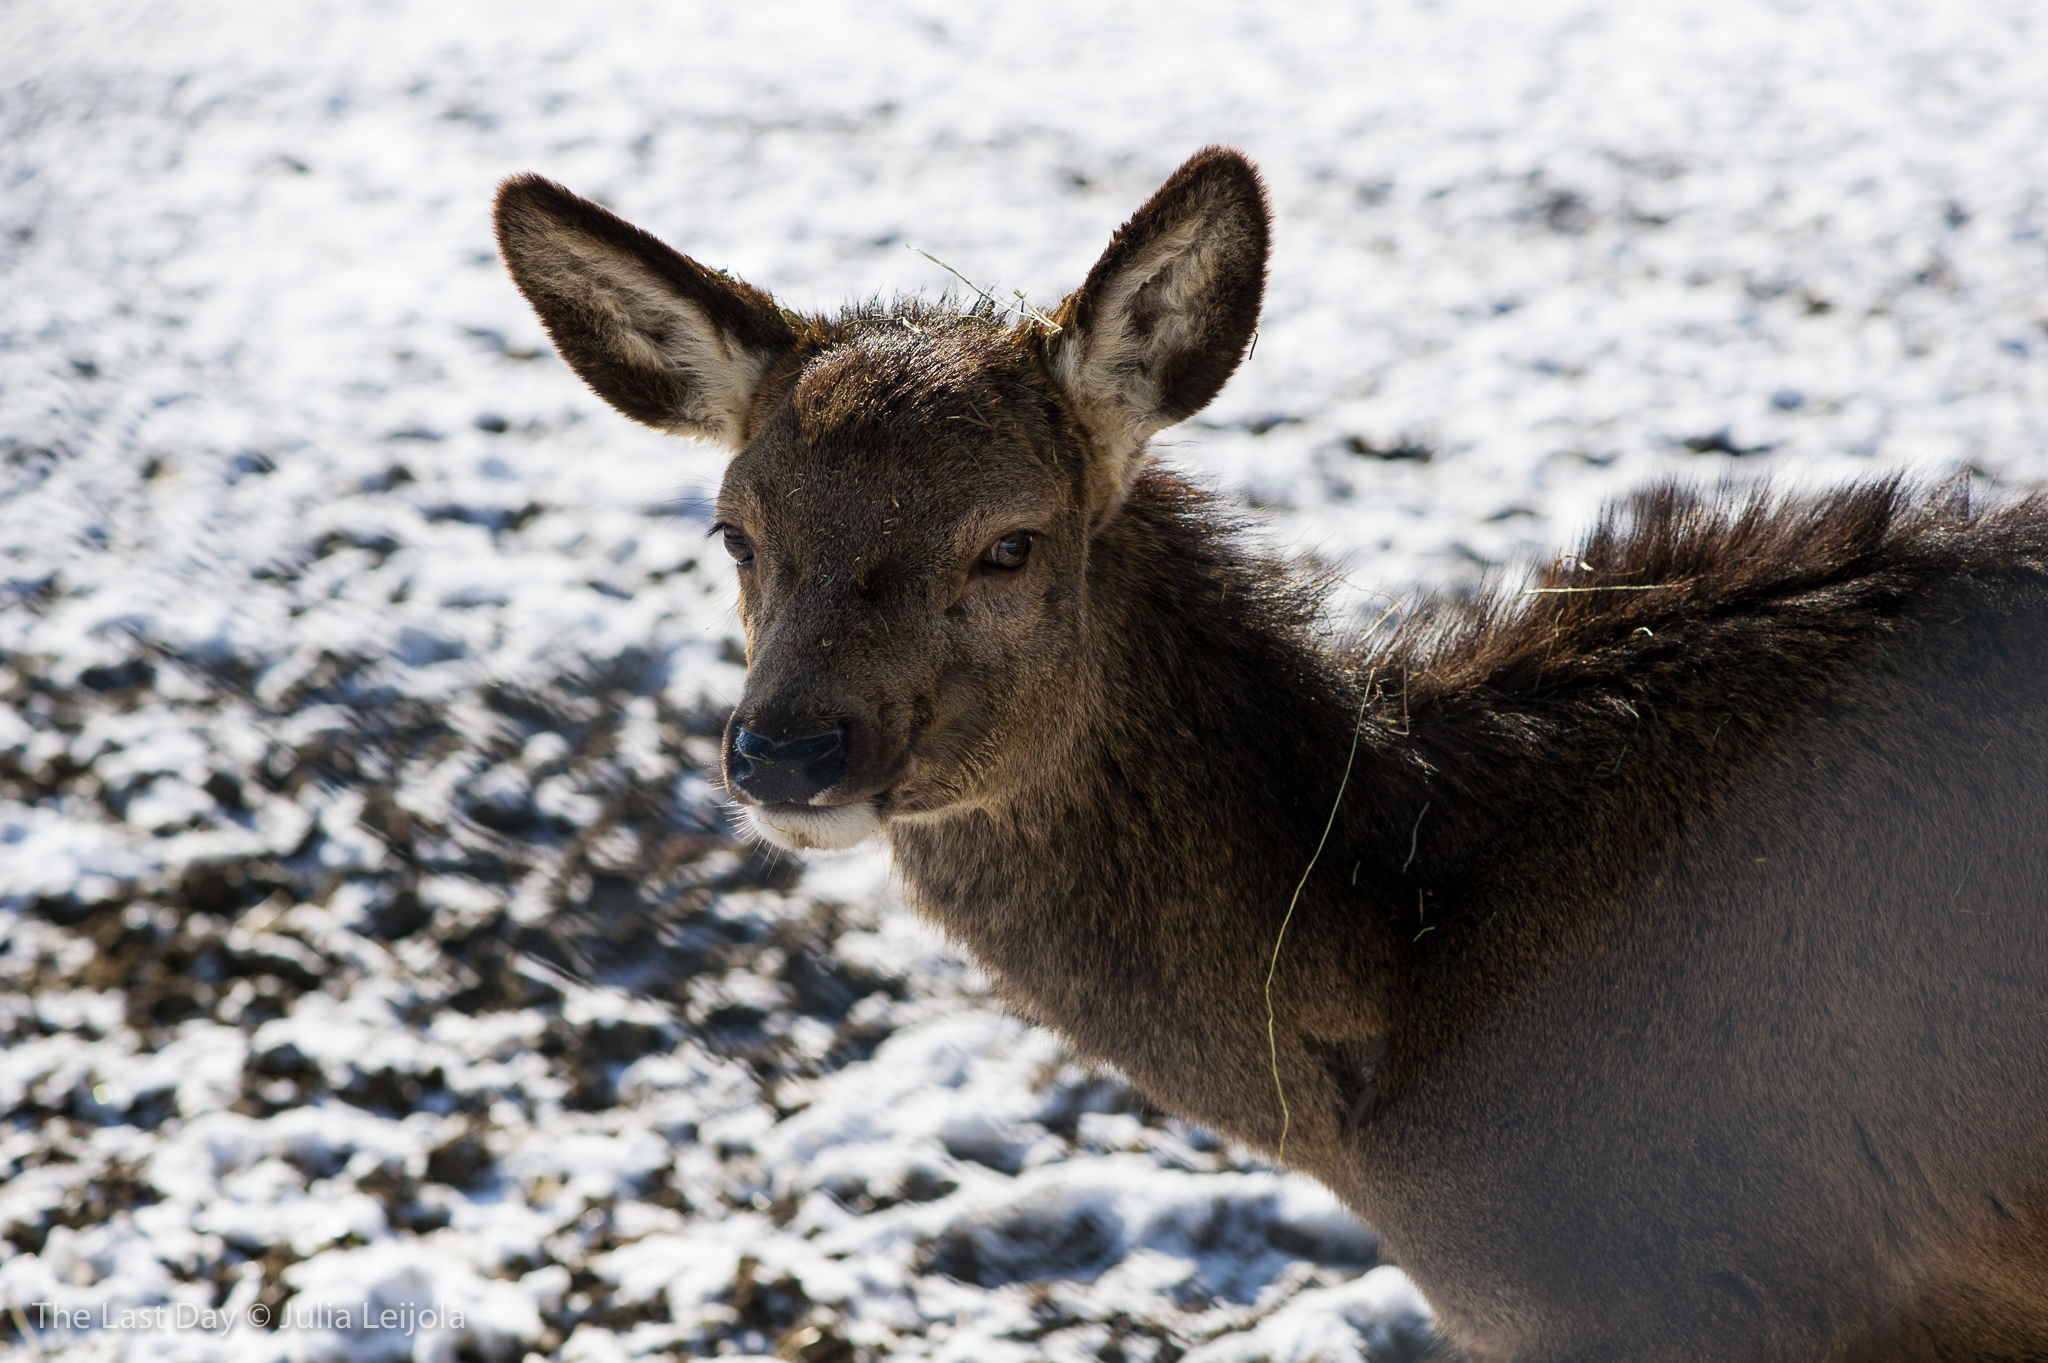 A young Cervus elaphus is looking straight into the camera.